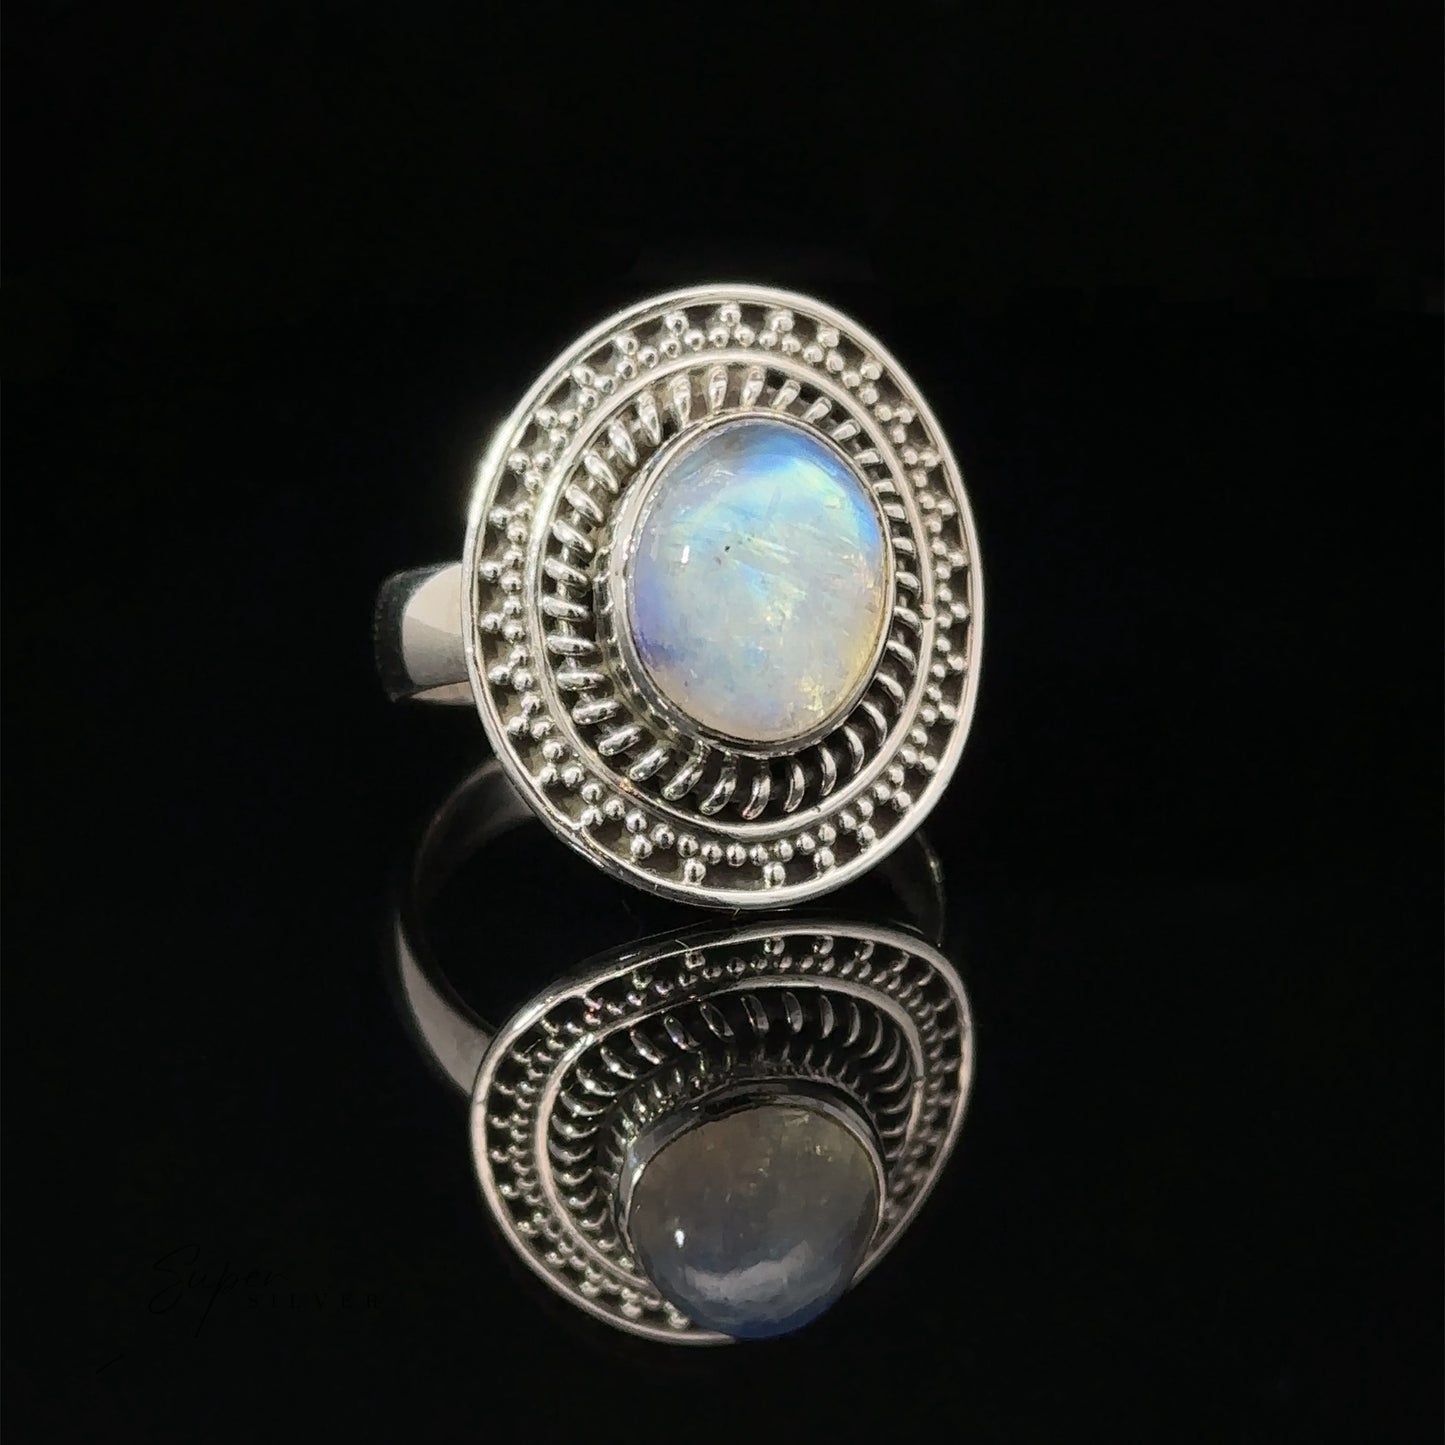 
                  
                    A moonstone ring with a braided disc design, displayed on a reflective black surface.
                  
                